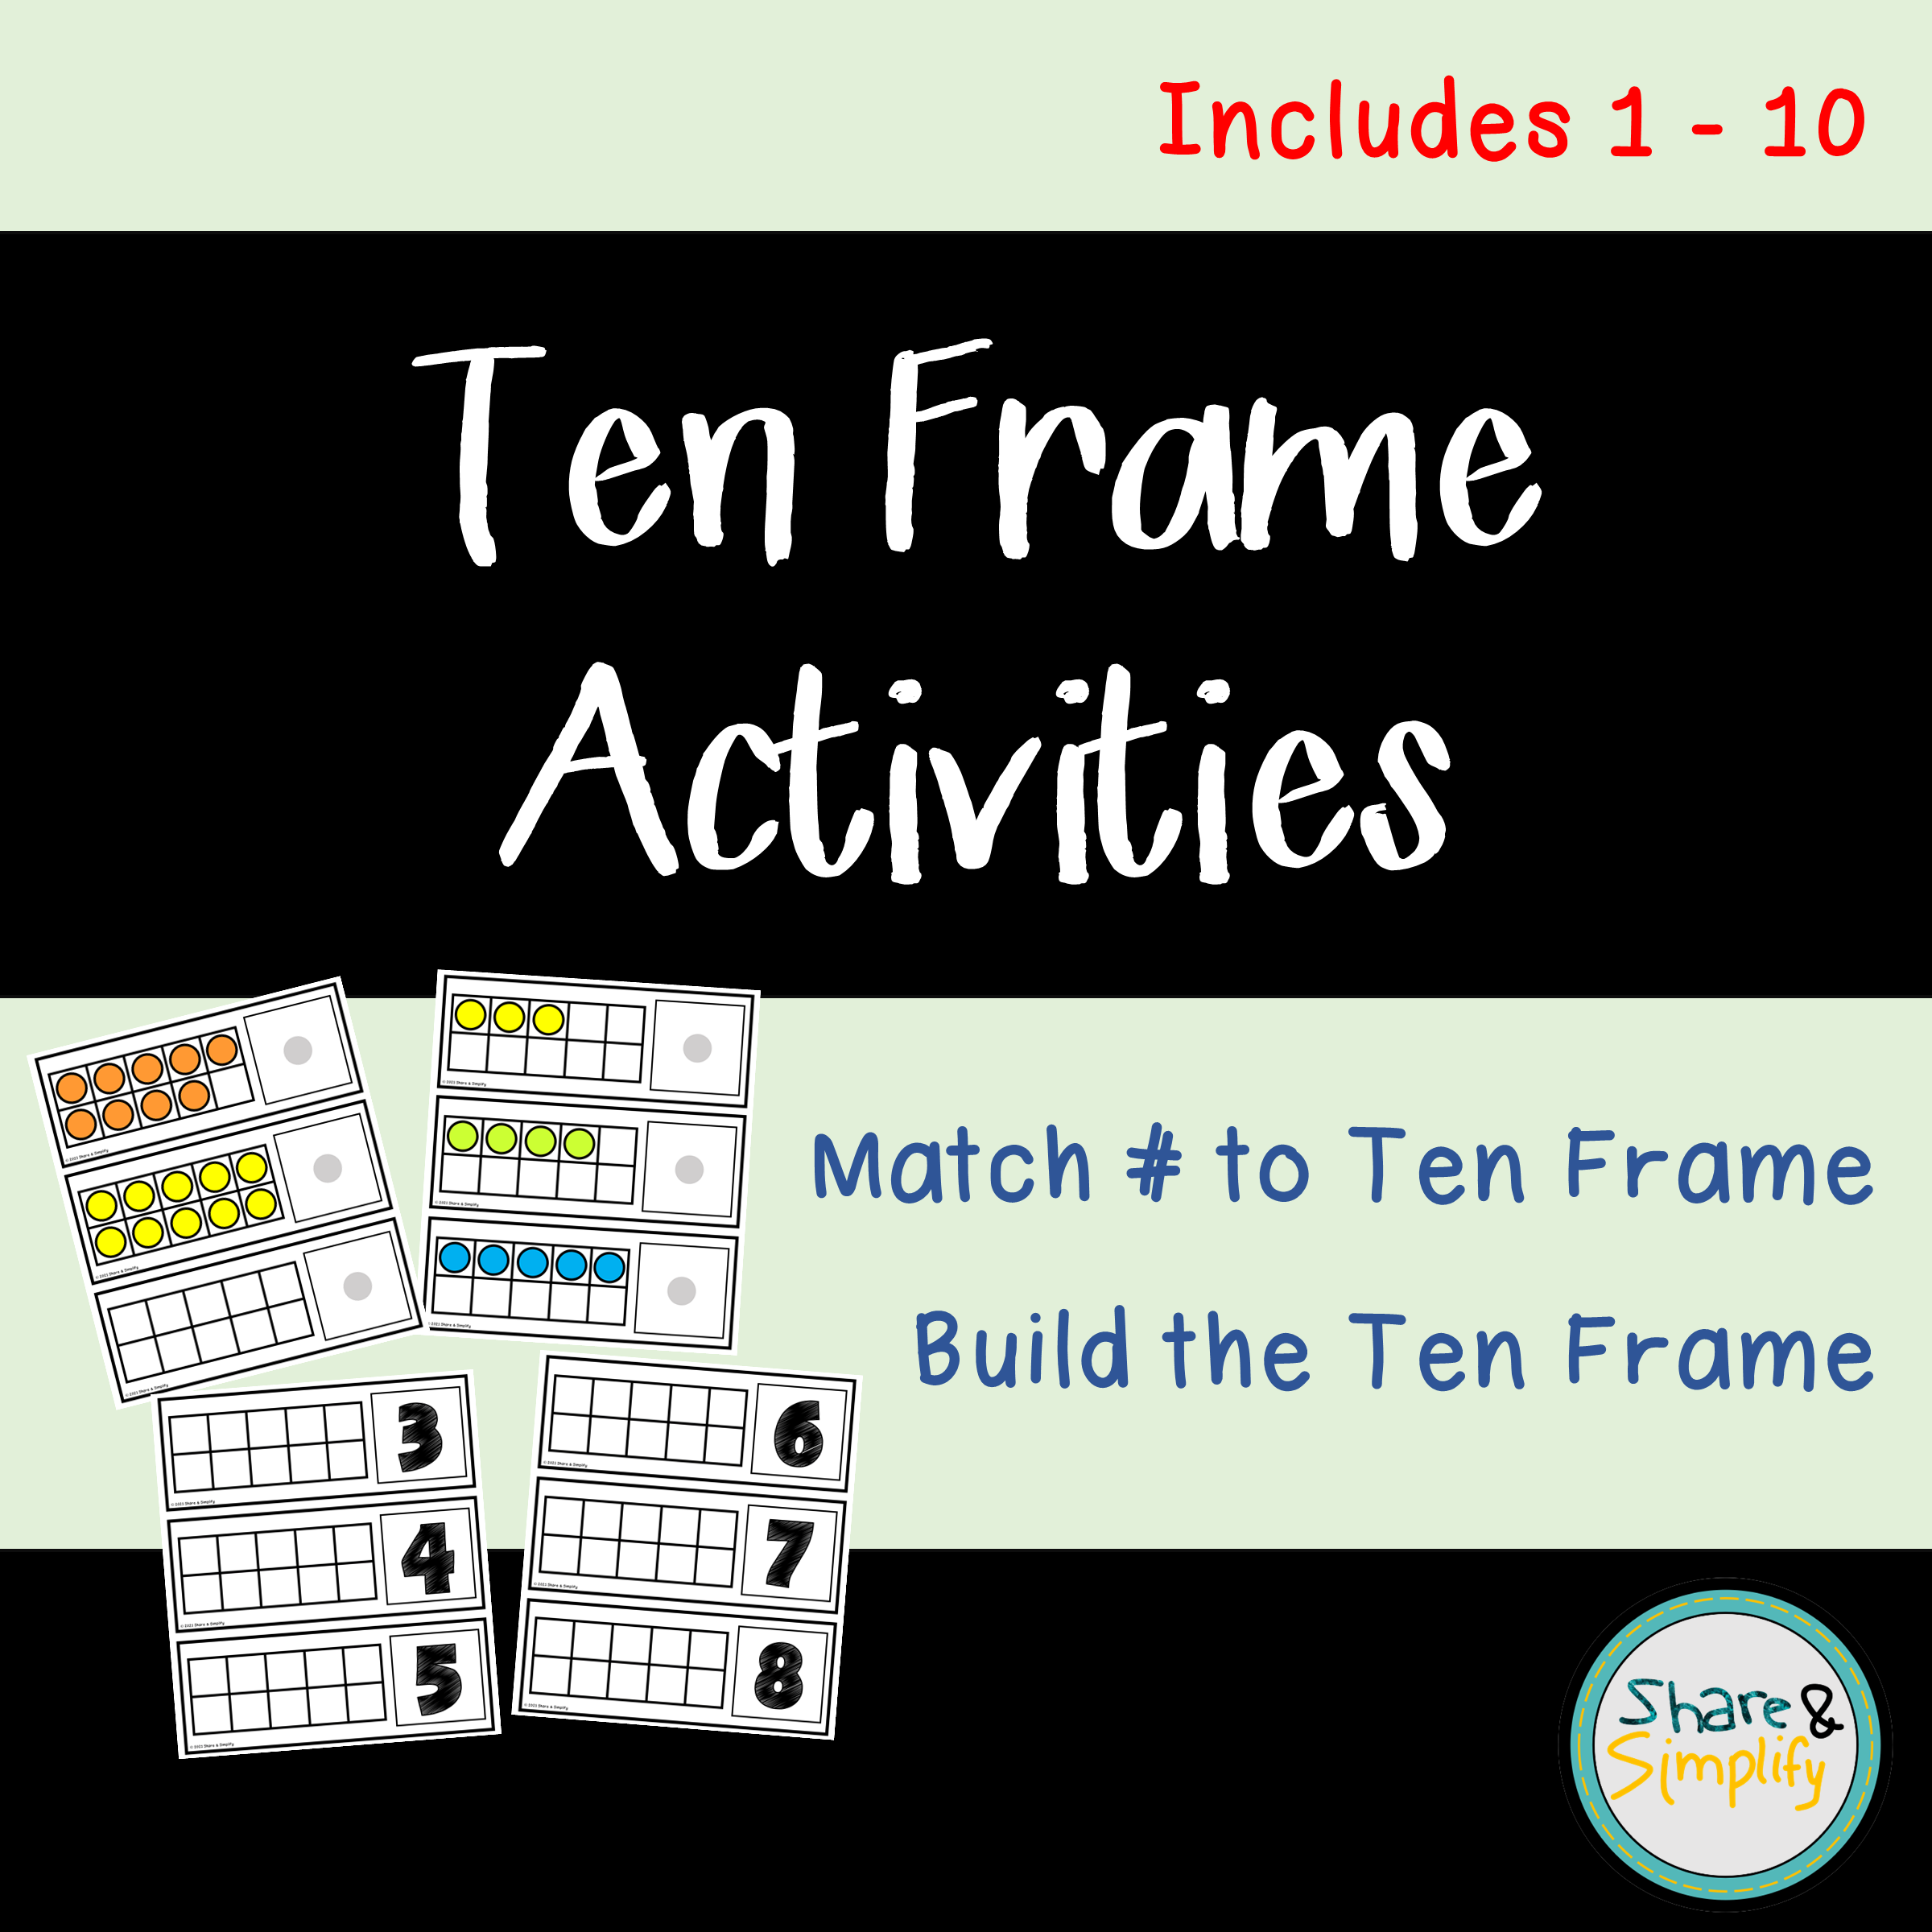 Match Number to Ten Frame & Build the Ten Frame